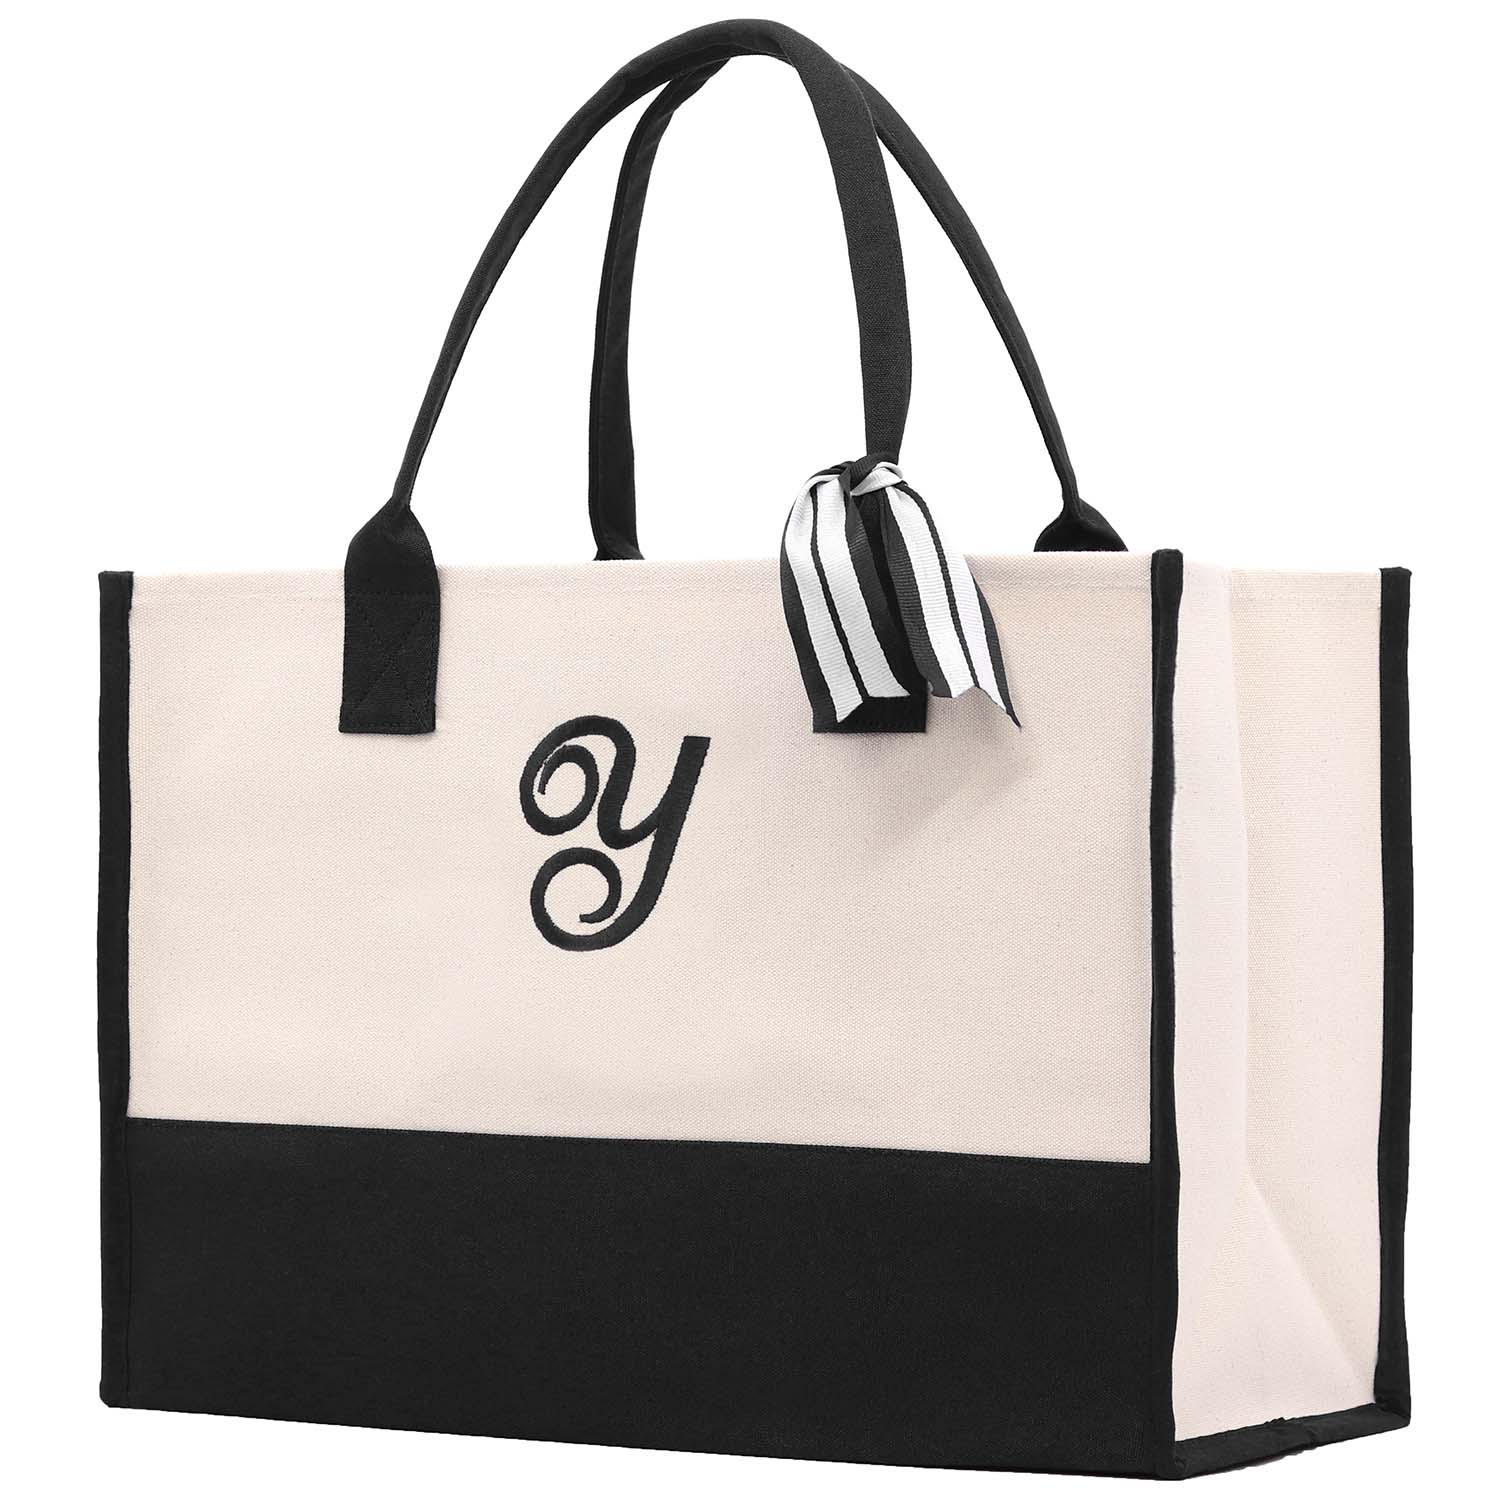 Monogram Tote Bag with 100% Cotton Canvas and a Chic Personalized Mono ...